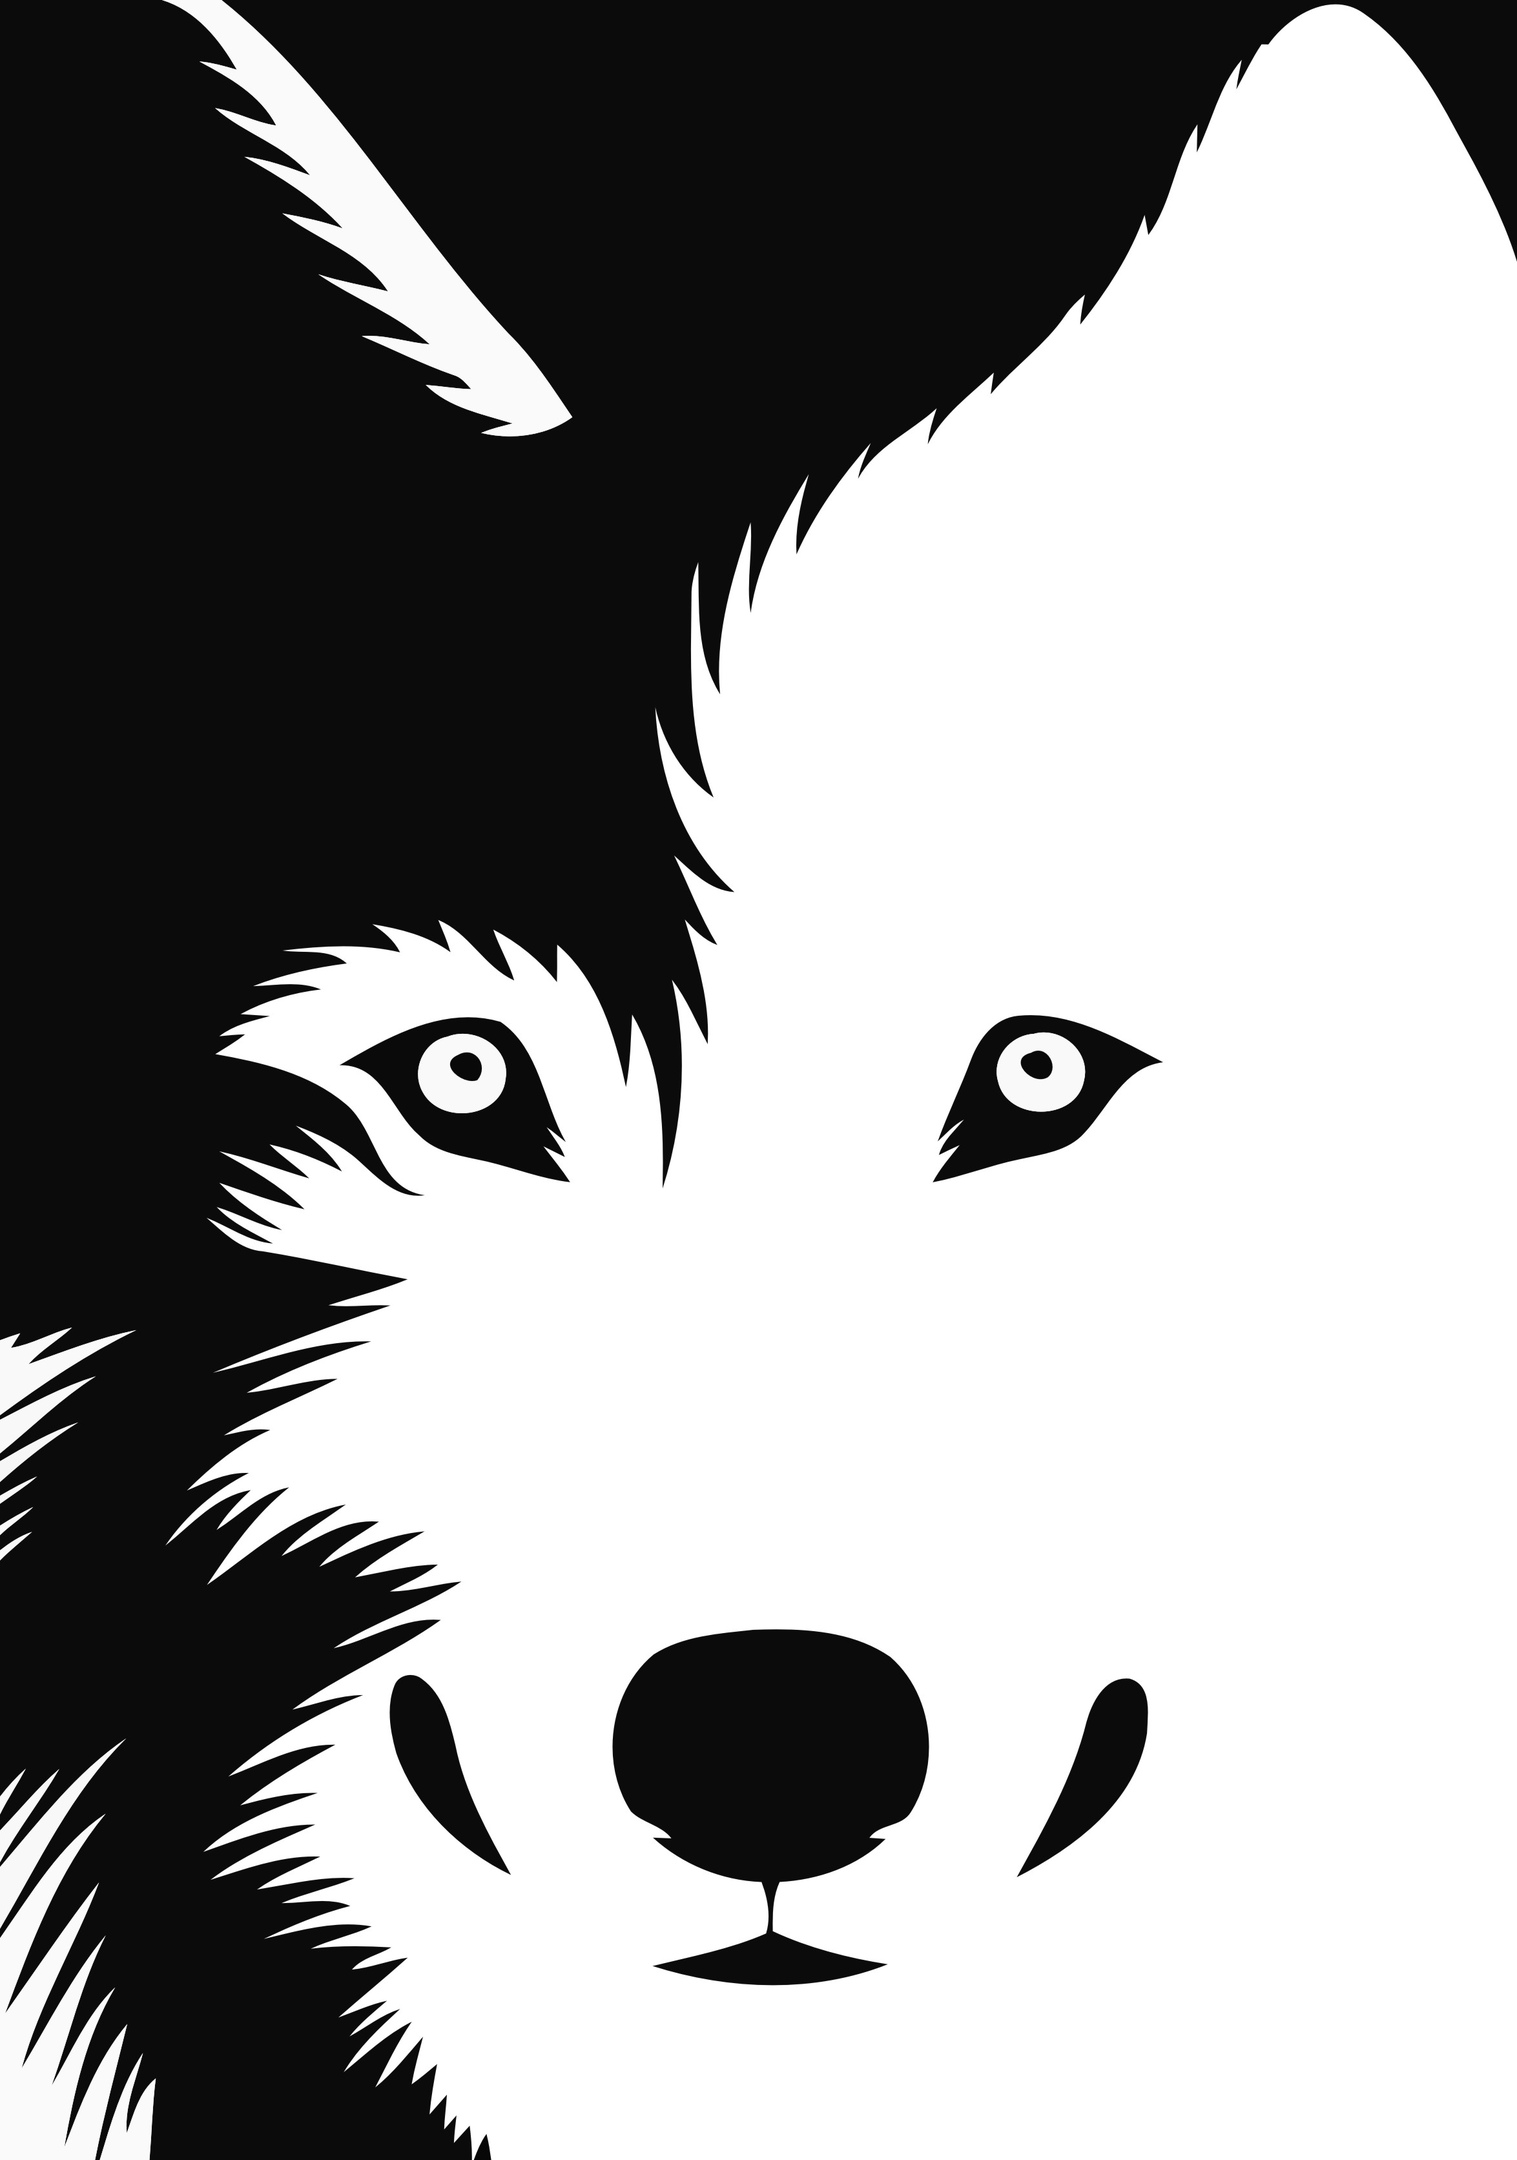 Dog Sticker Stencil Black and White Free Vector cdr Download 3axis.co